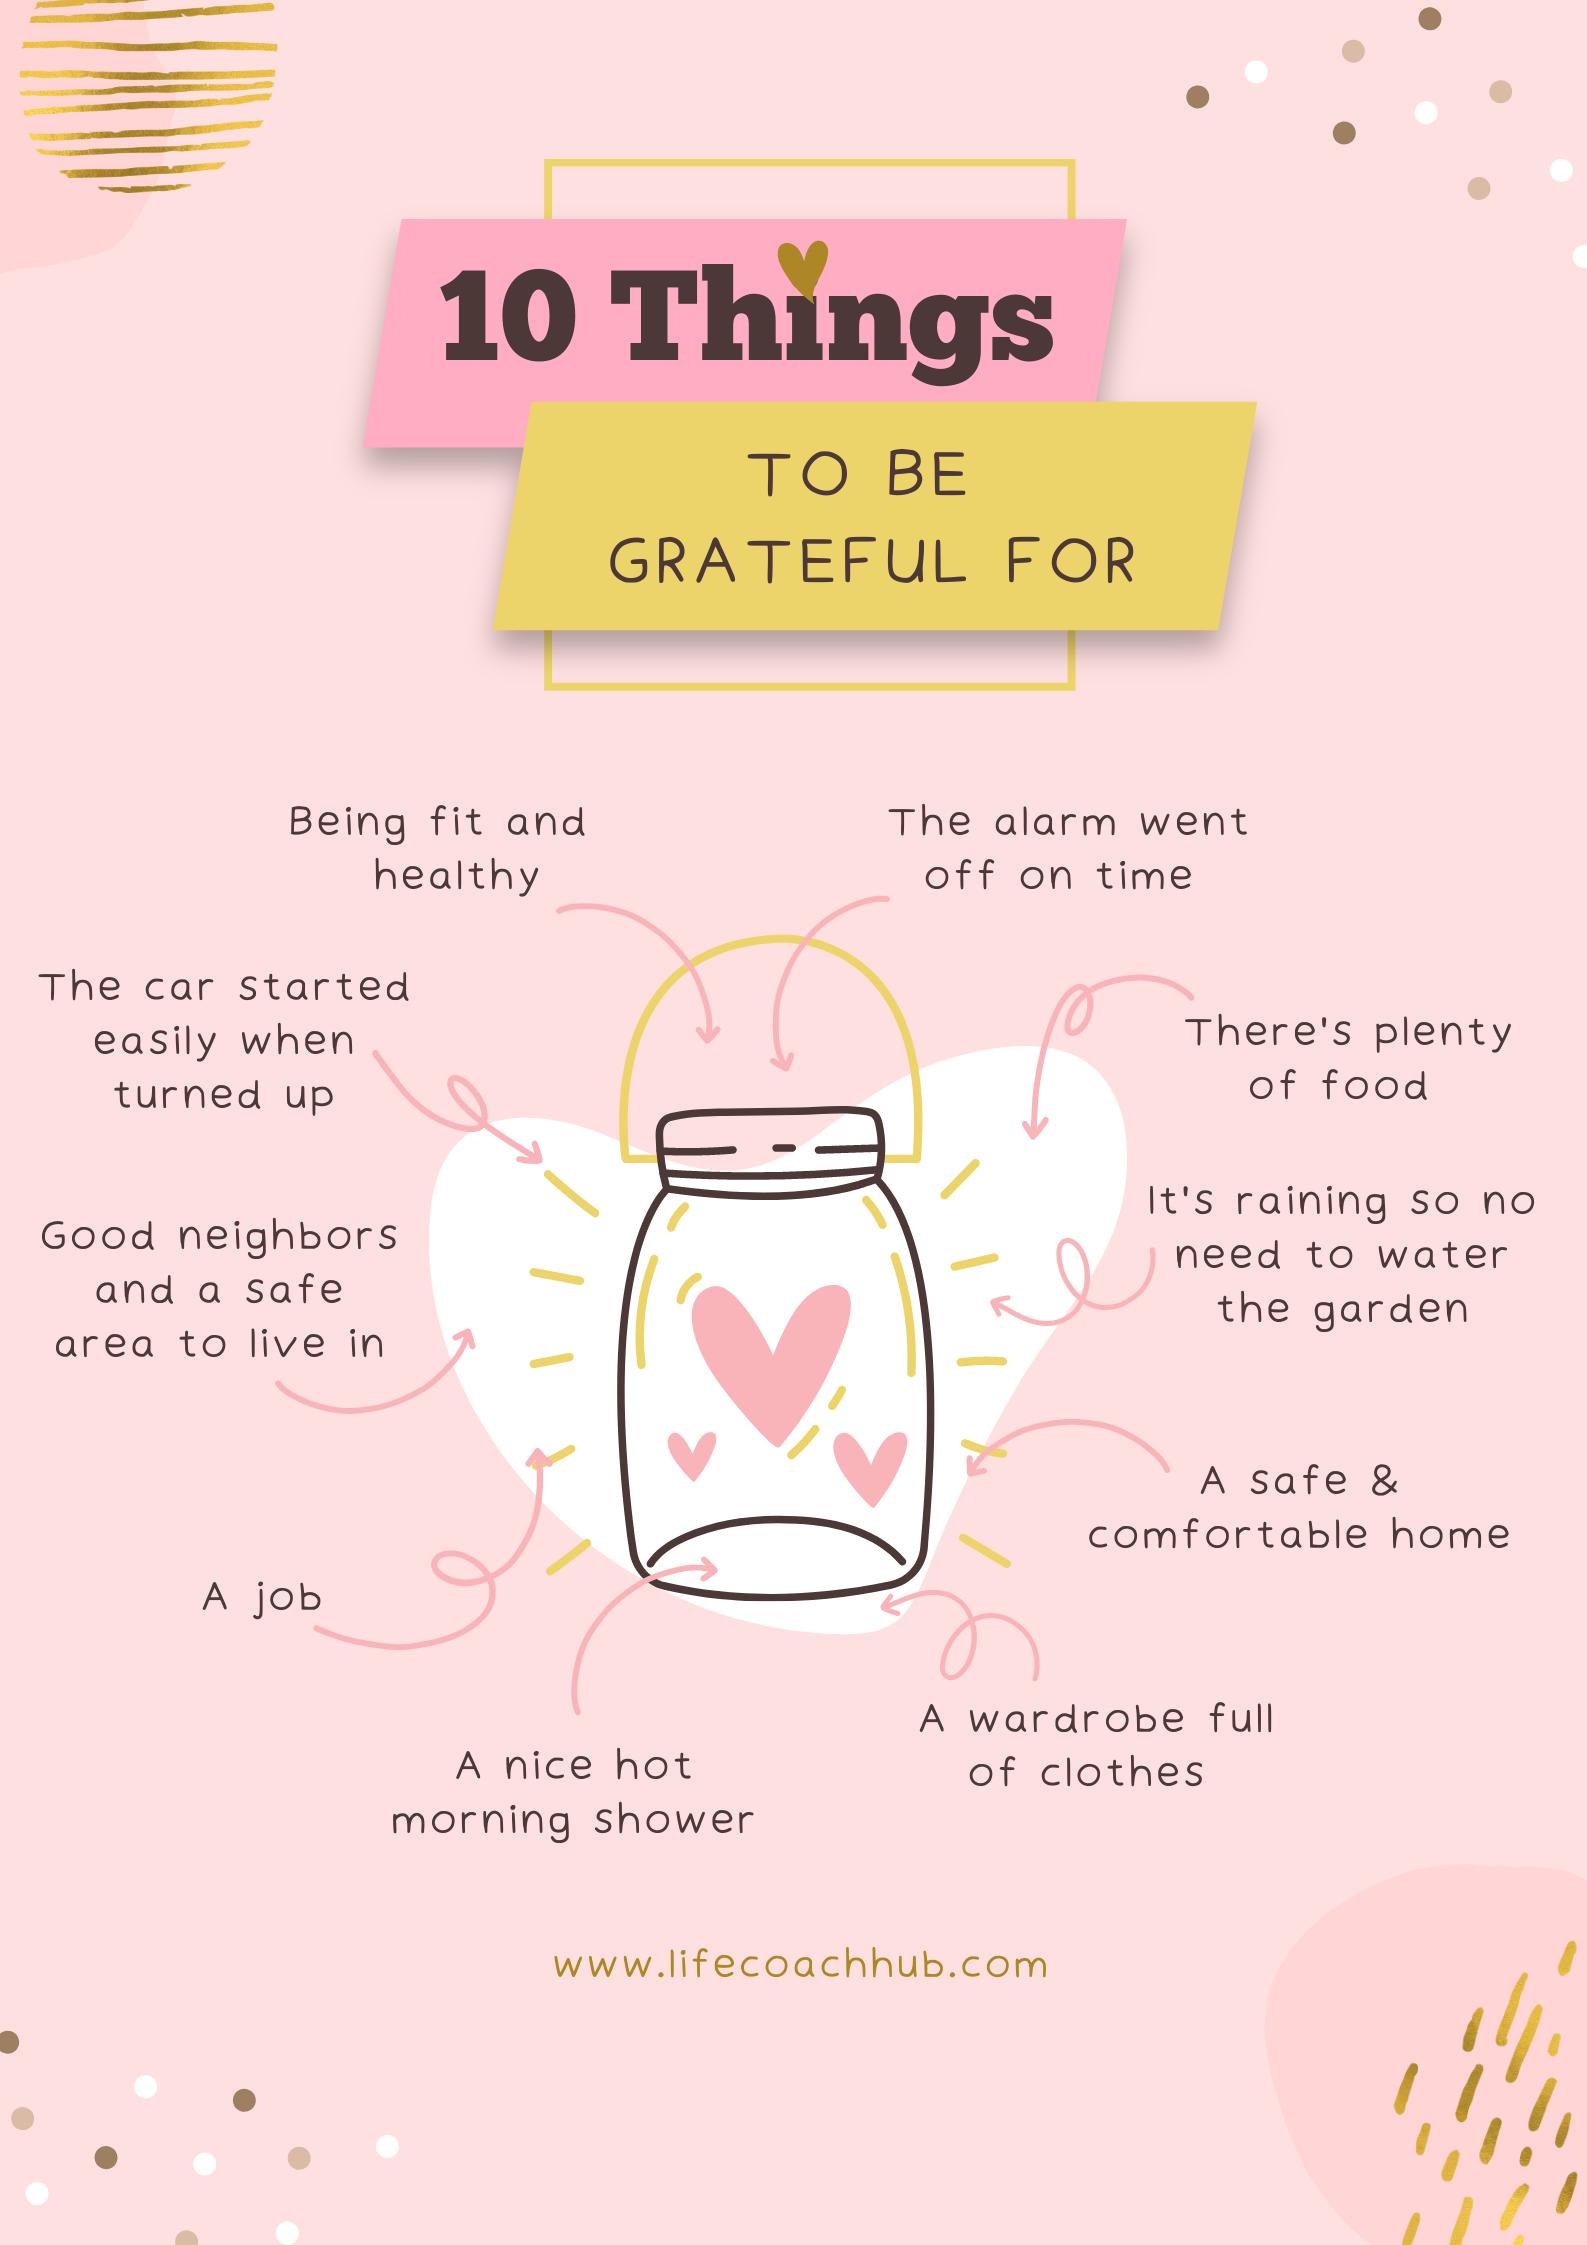 10 Things to be grateful for